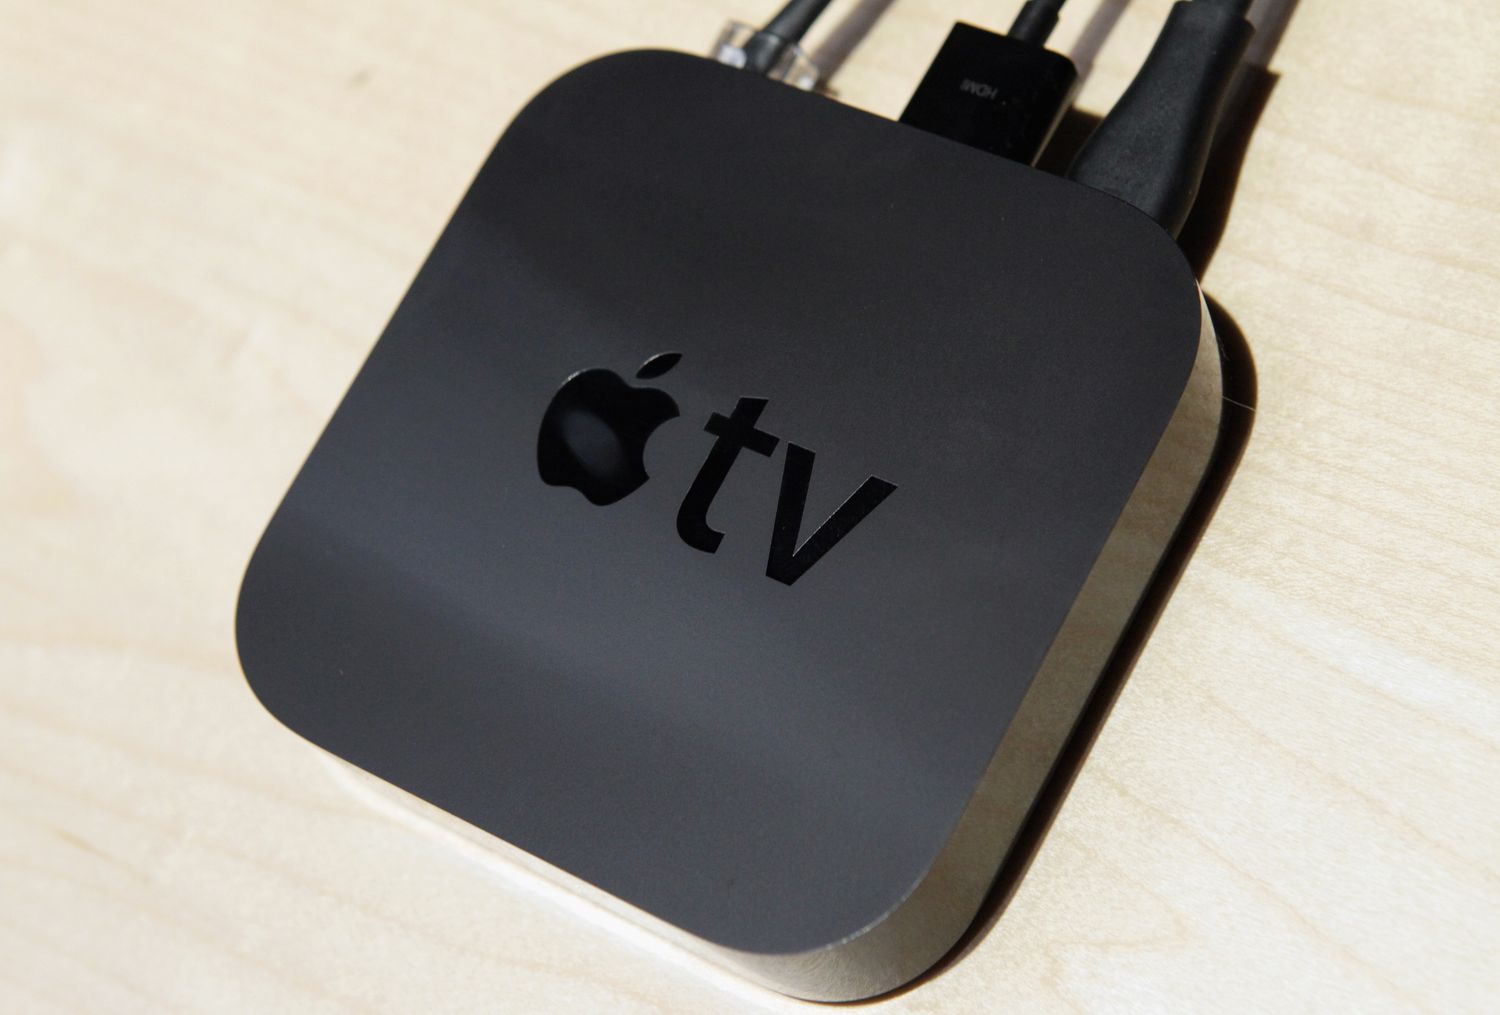 How to Factory Reset Any Apple TV